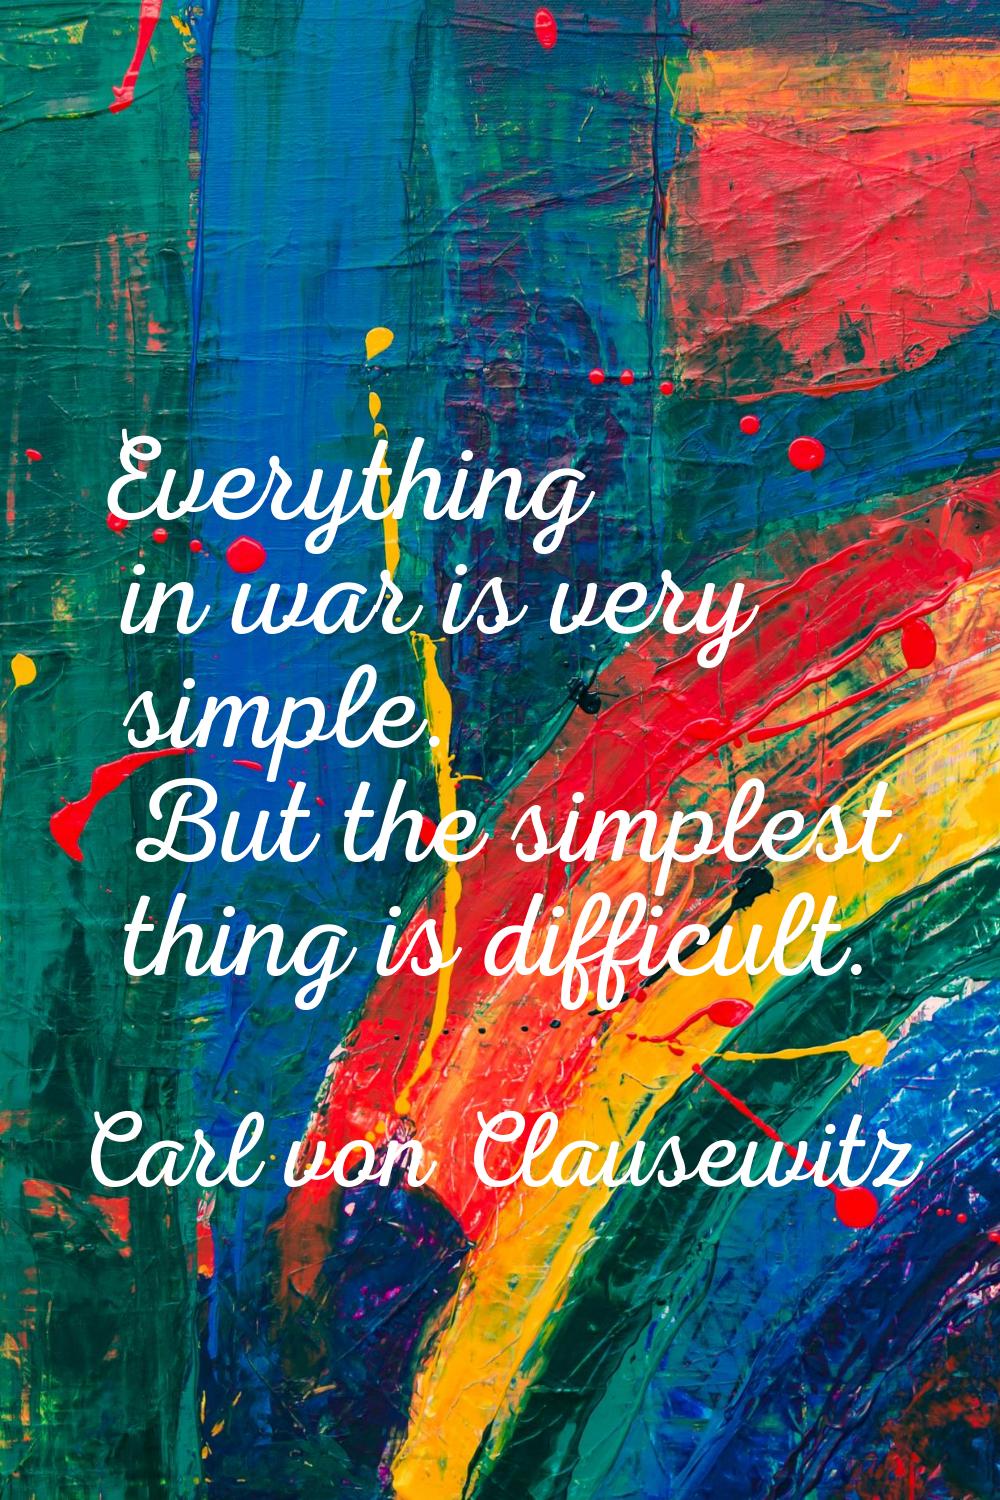 Everything in war is very simple. But the simplest thing is difficult.